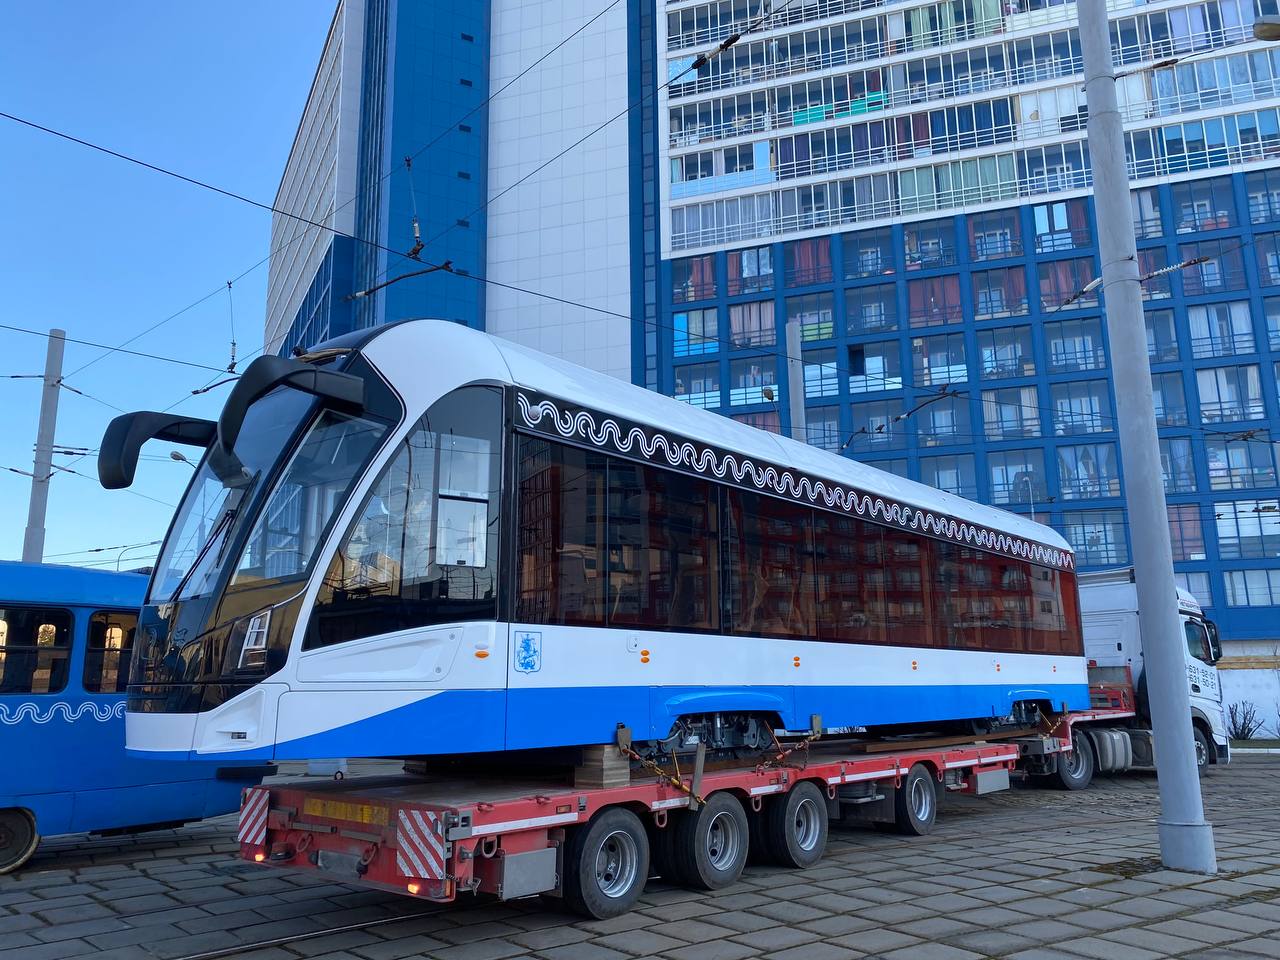 Moskwa — Trams without fleet numbers